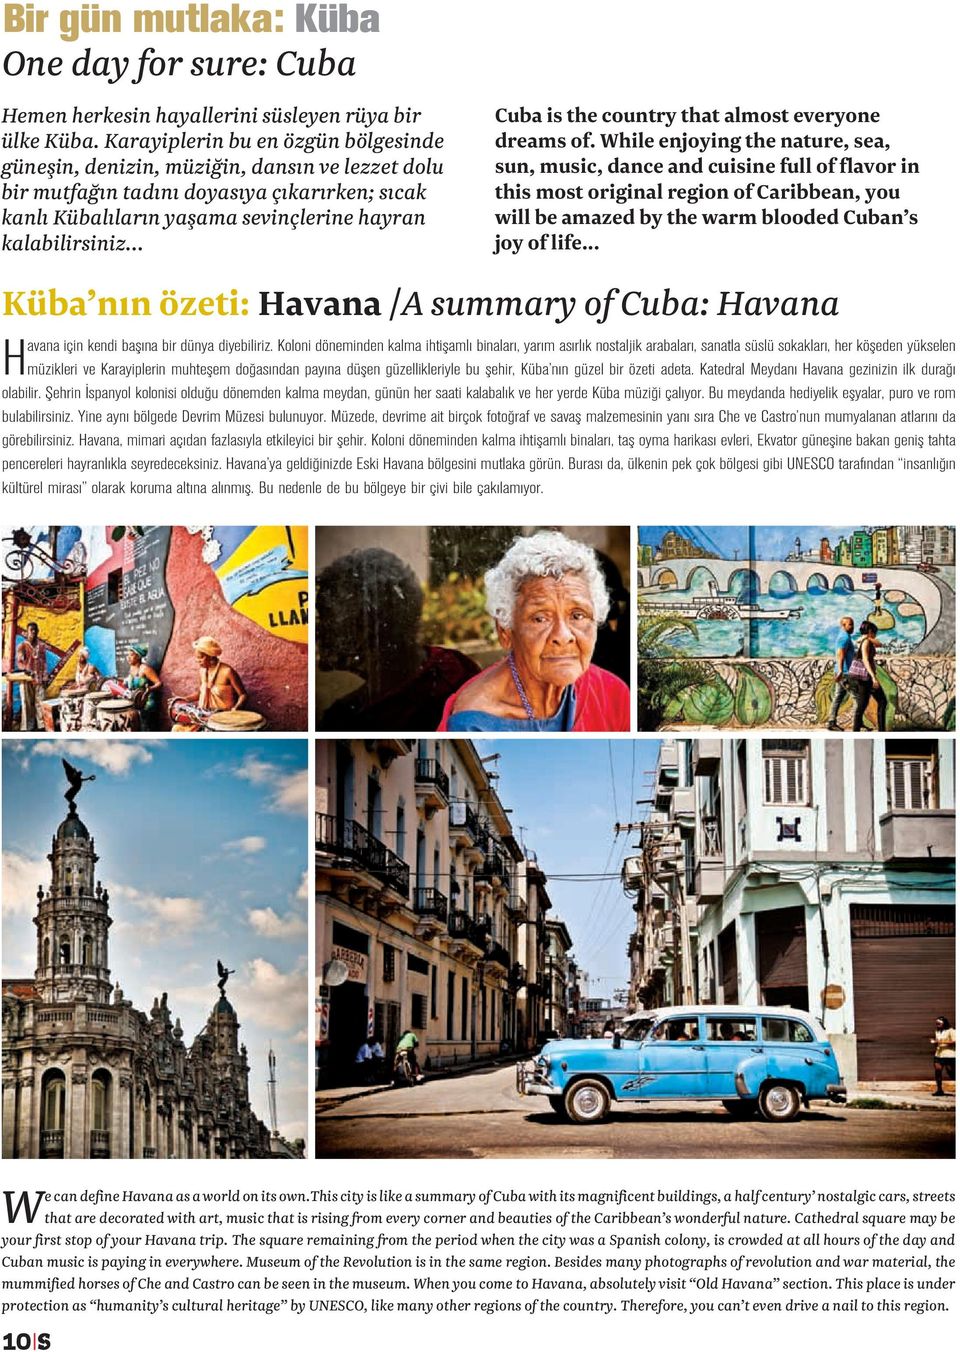 .. Cuba is the country that almost everyone dreams of.